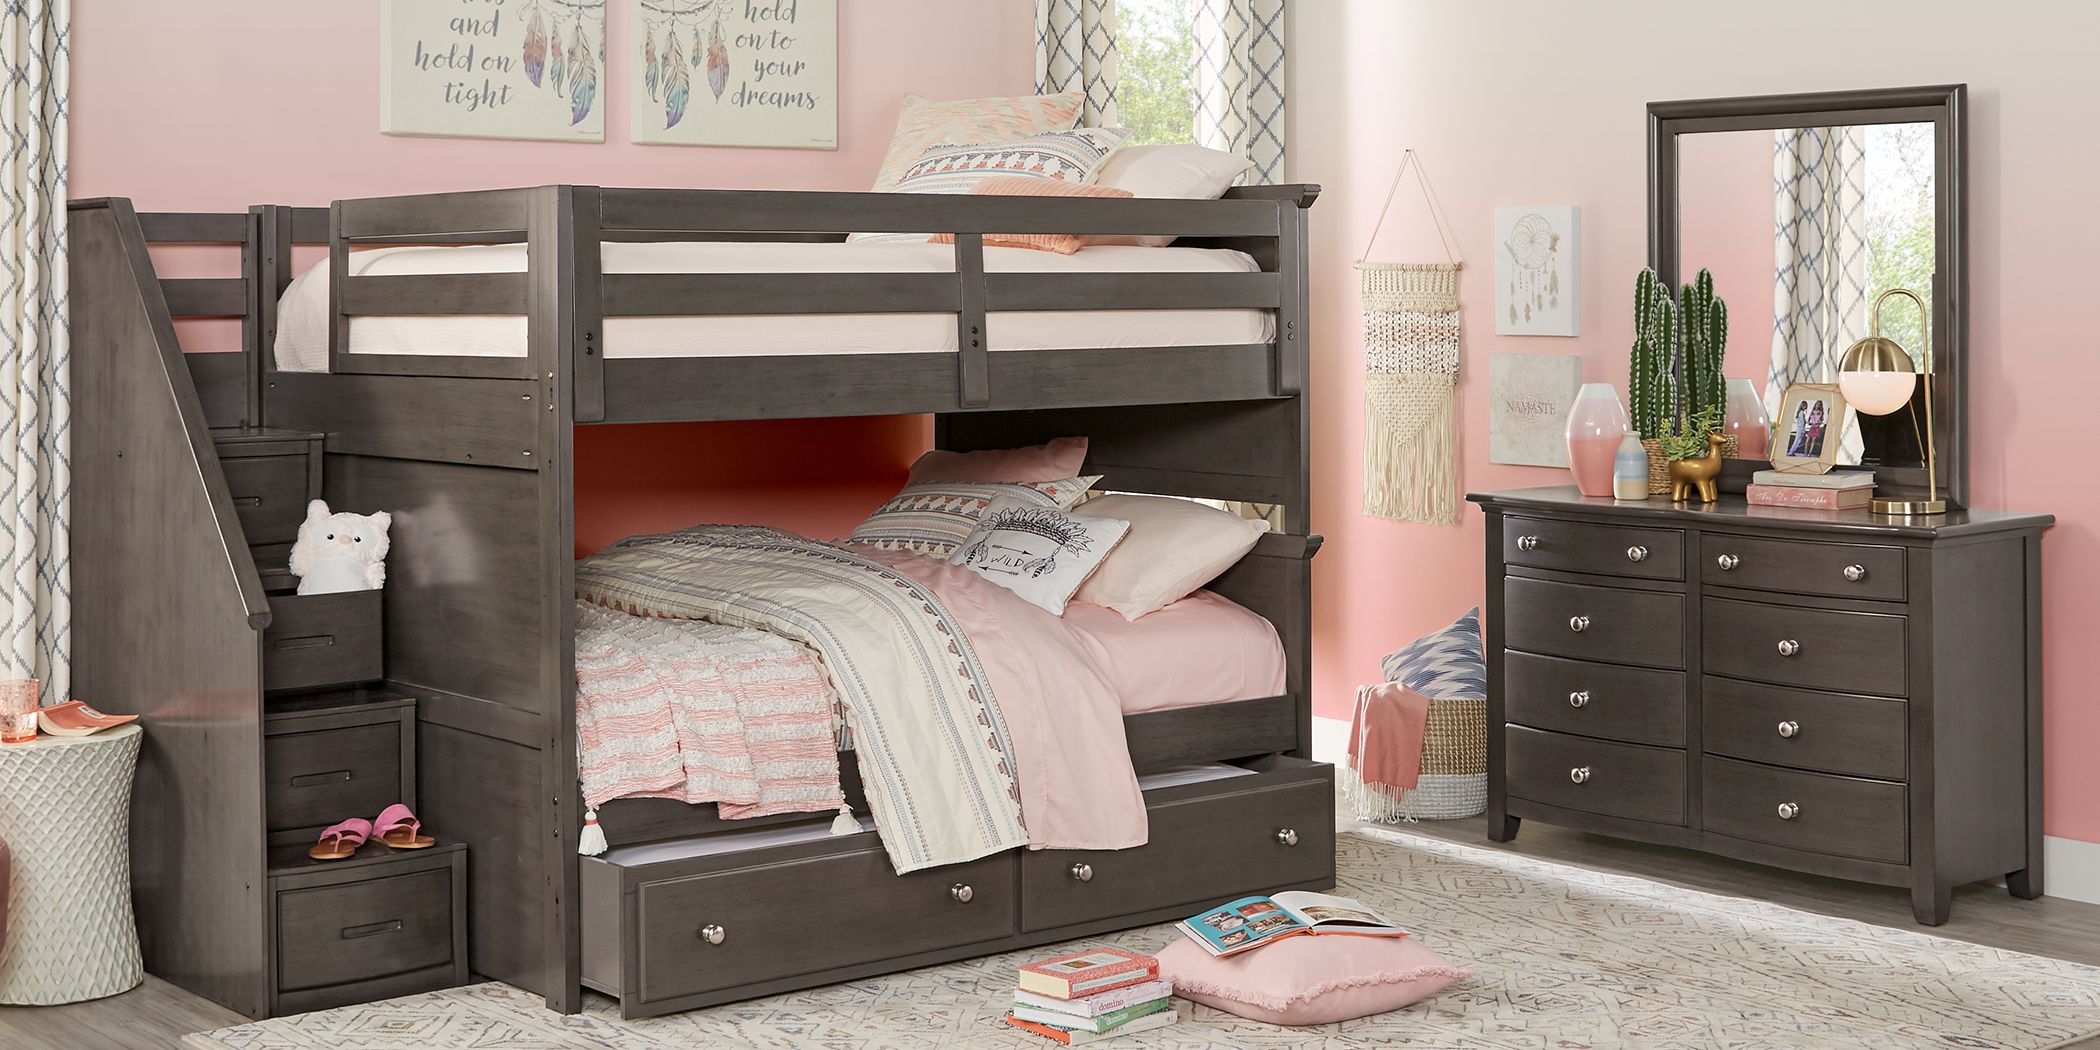 girls bunk beds with storage